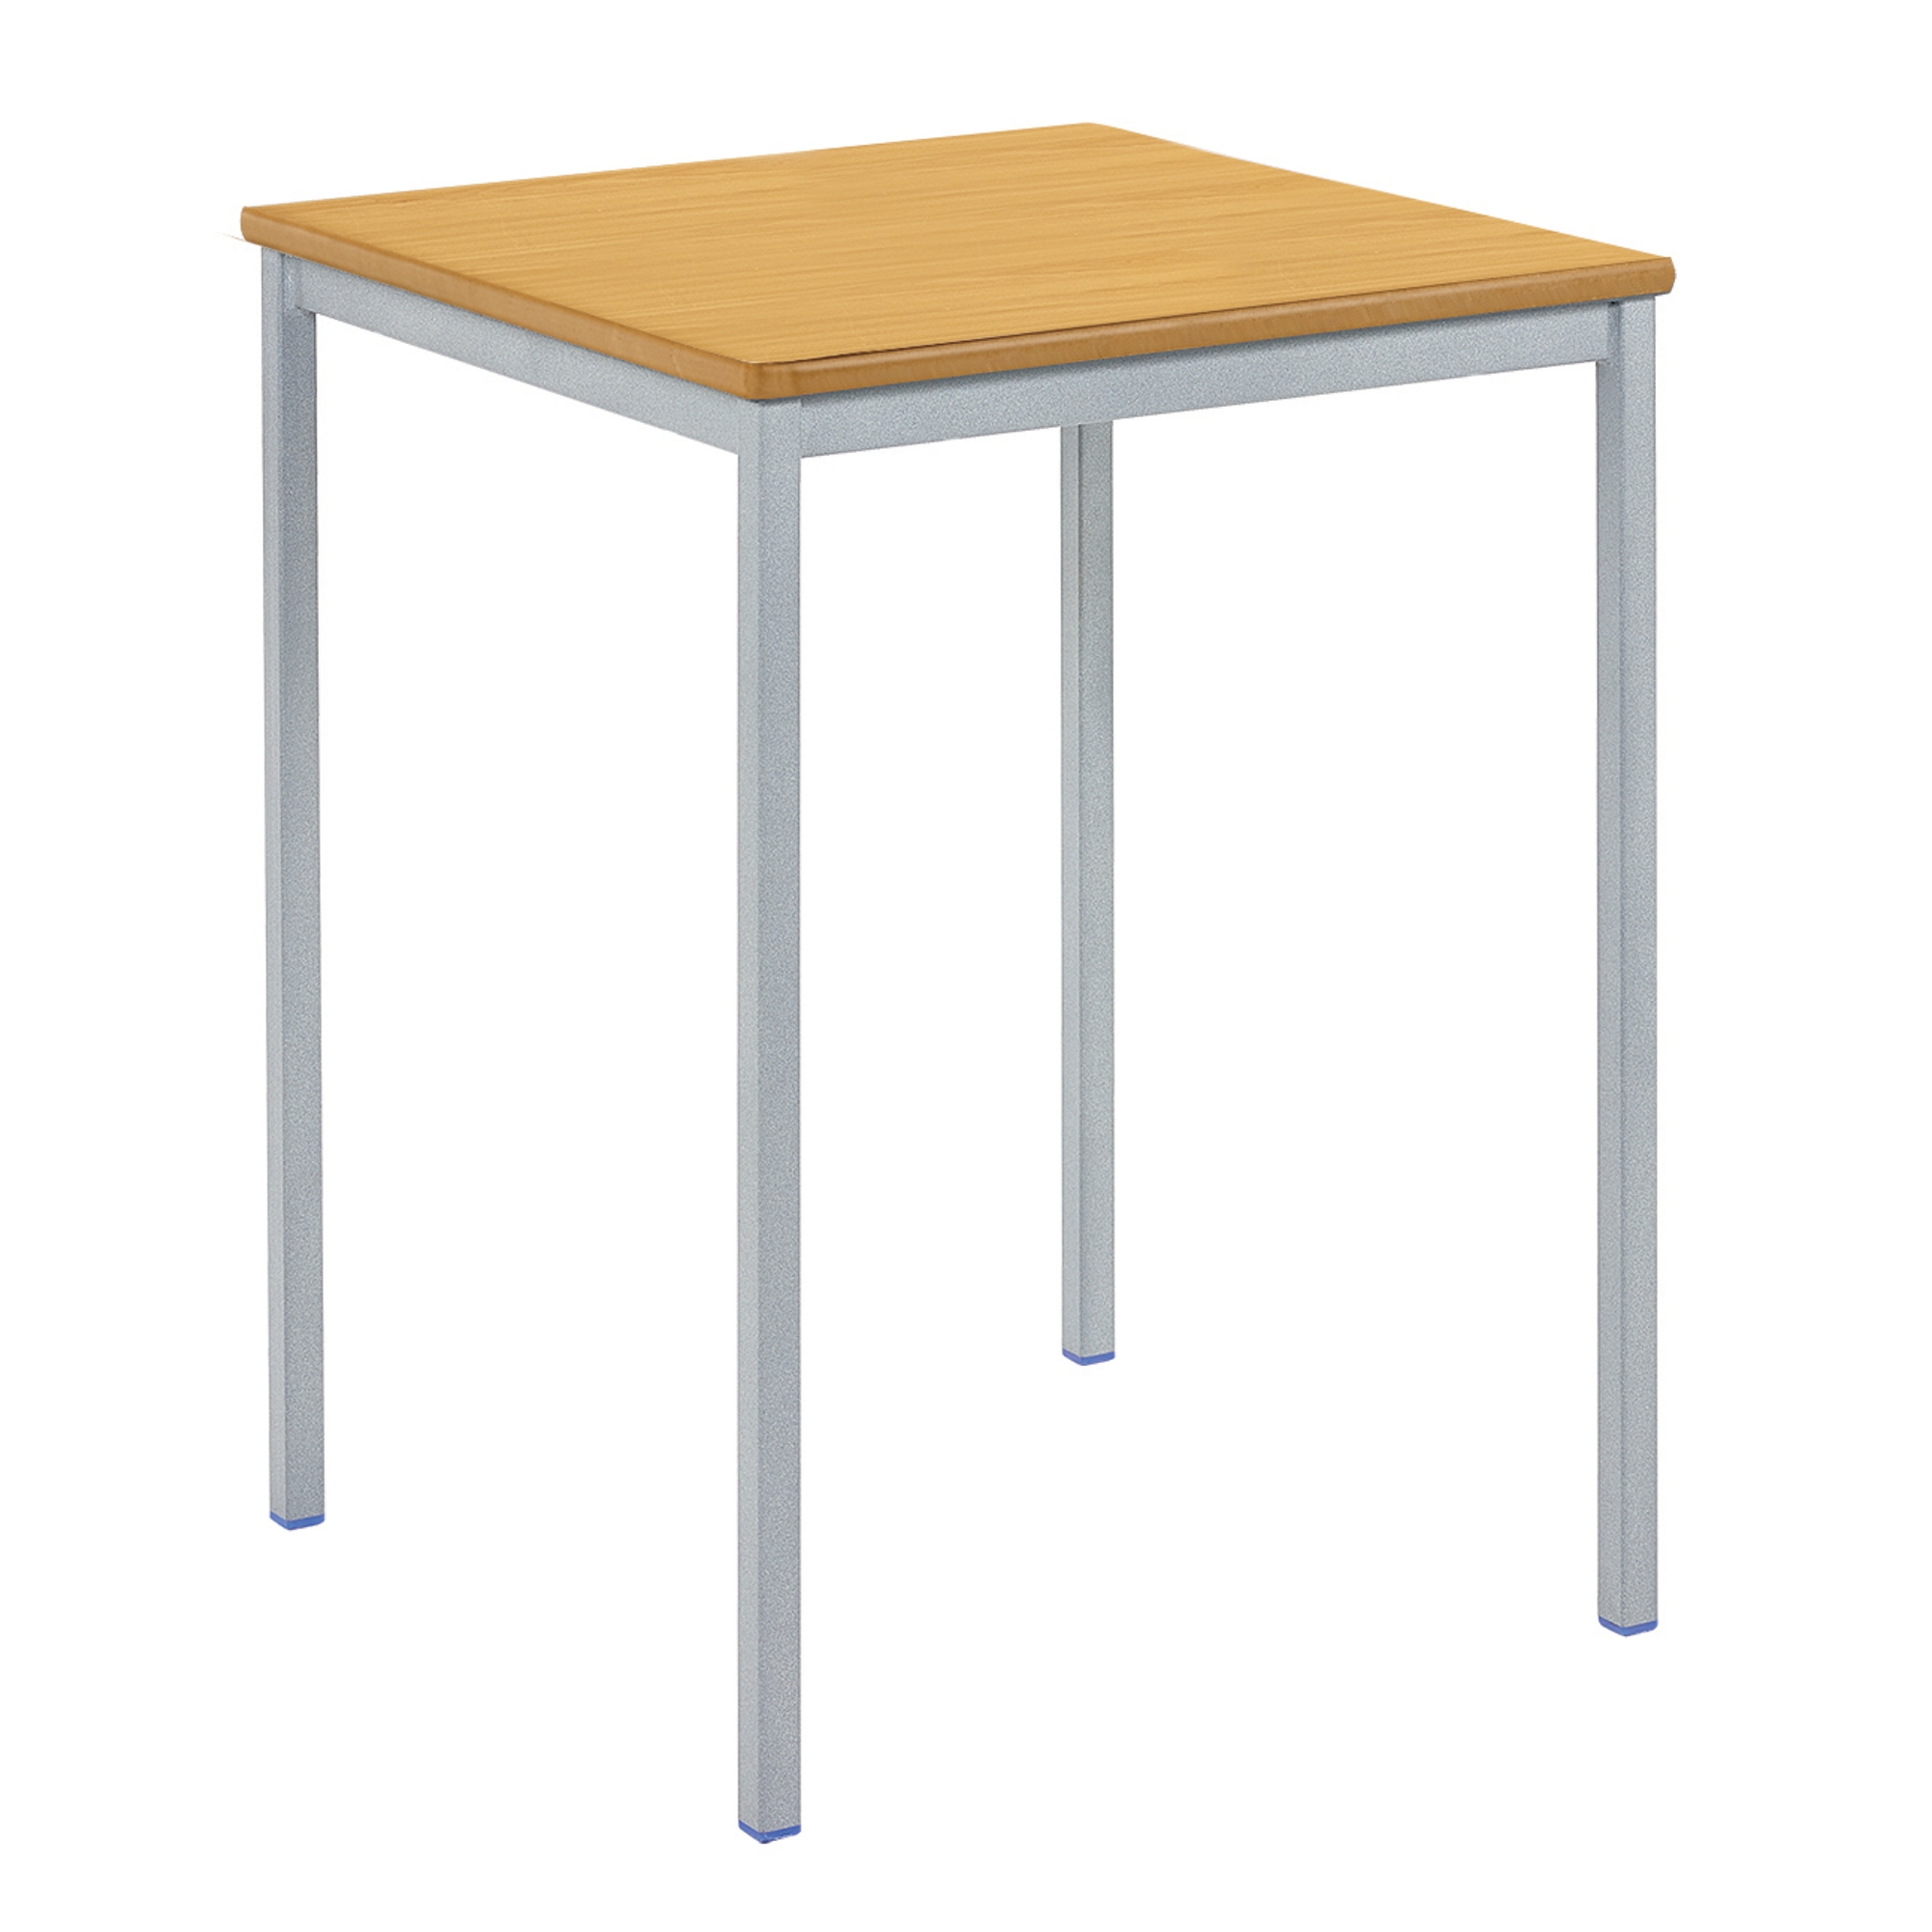 Classmates Square Fully Welded Classroom Table - 600 x 600 x 710mm - Beech